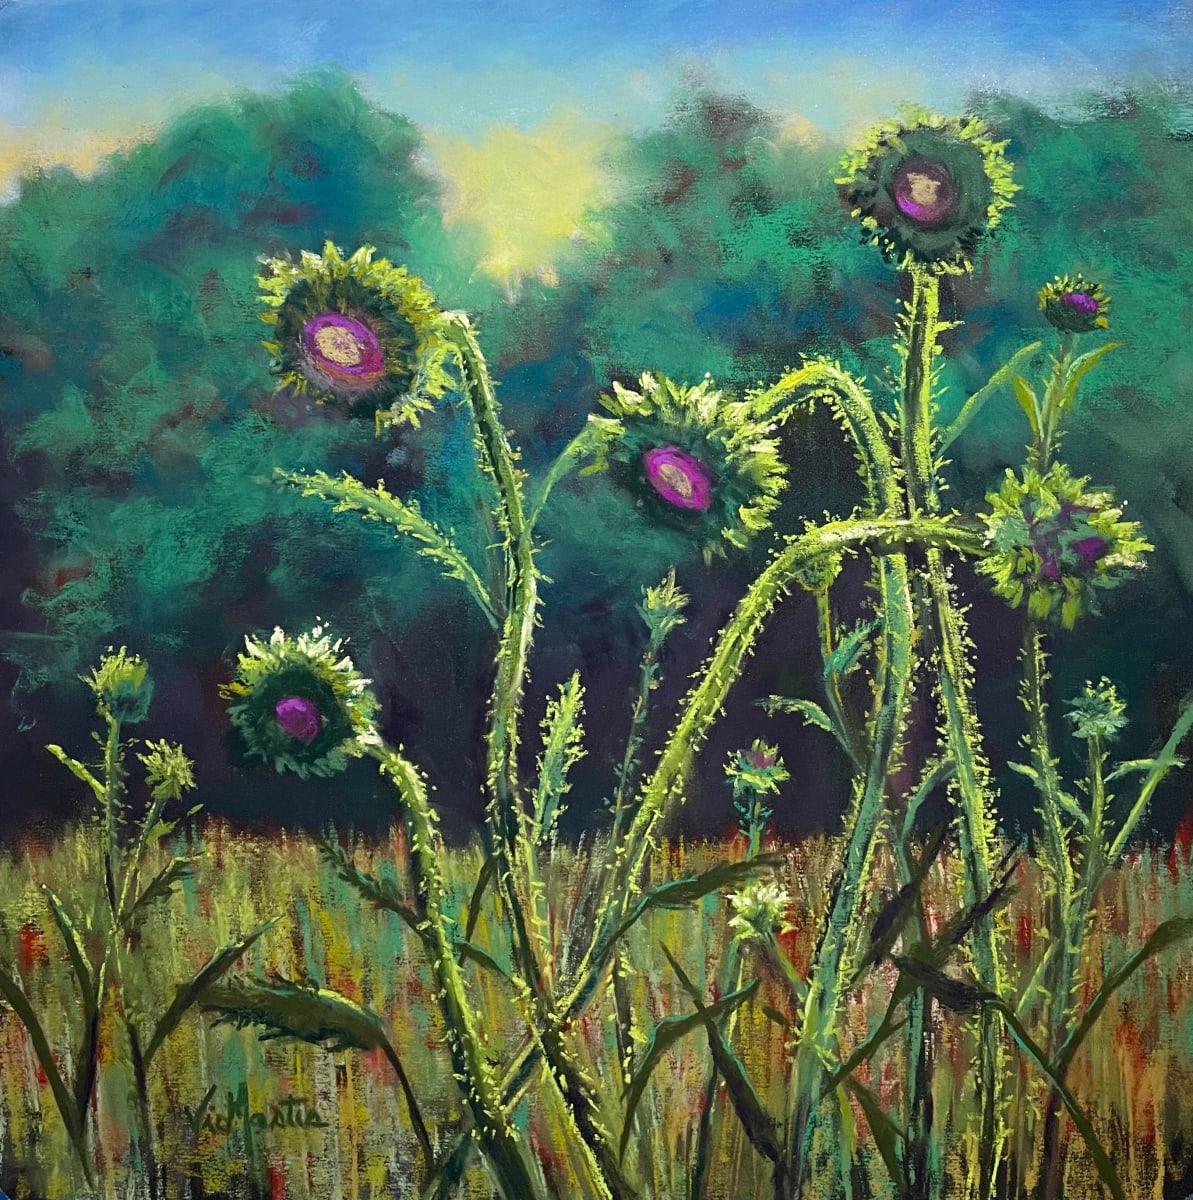 Dawn of a New Day by Vic Mastis  Image: As I was taking a walk, I came upon these alien like flowers.  I had never seen these Thistles before.  They seemed to have eyes and beautifully colored.  The sun was setting and made a glow around the outer edges.